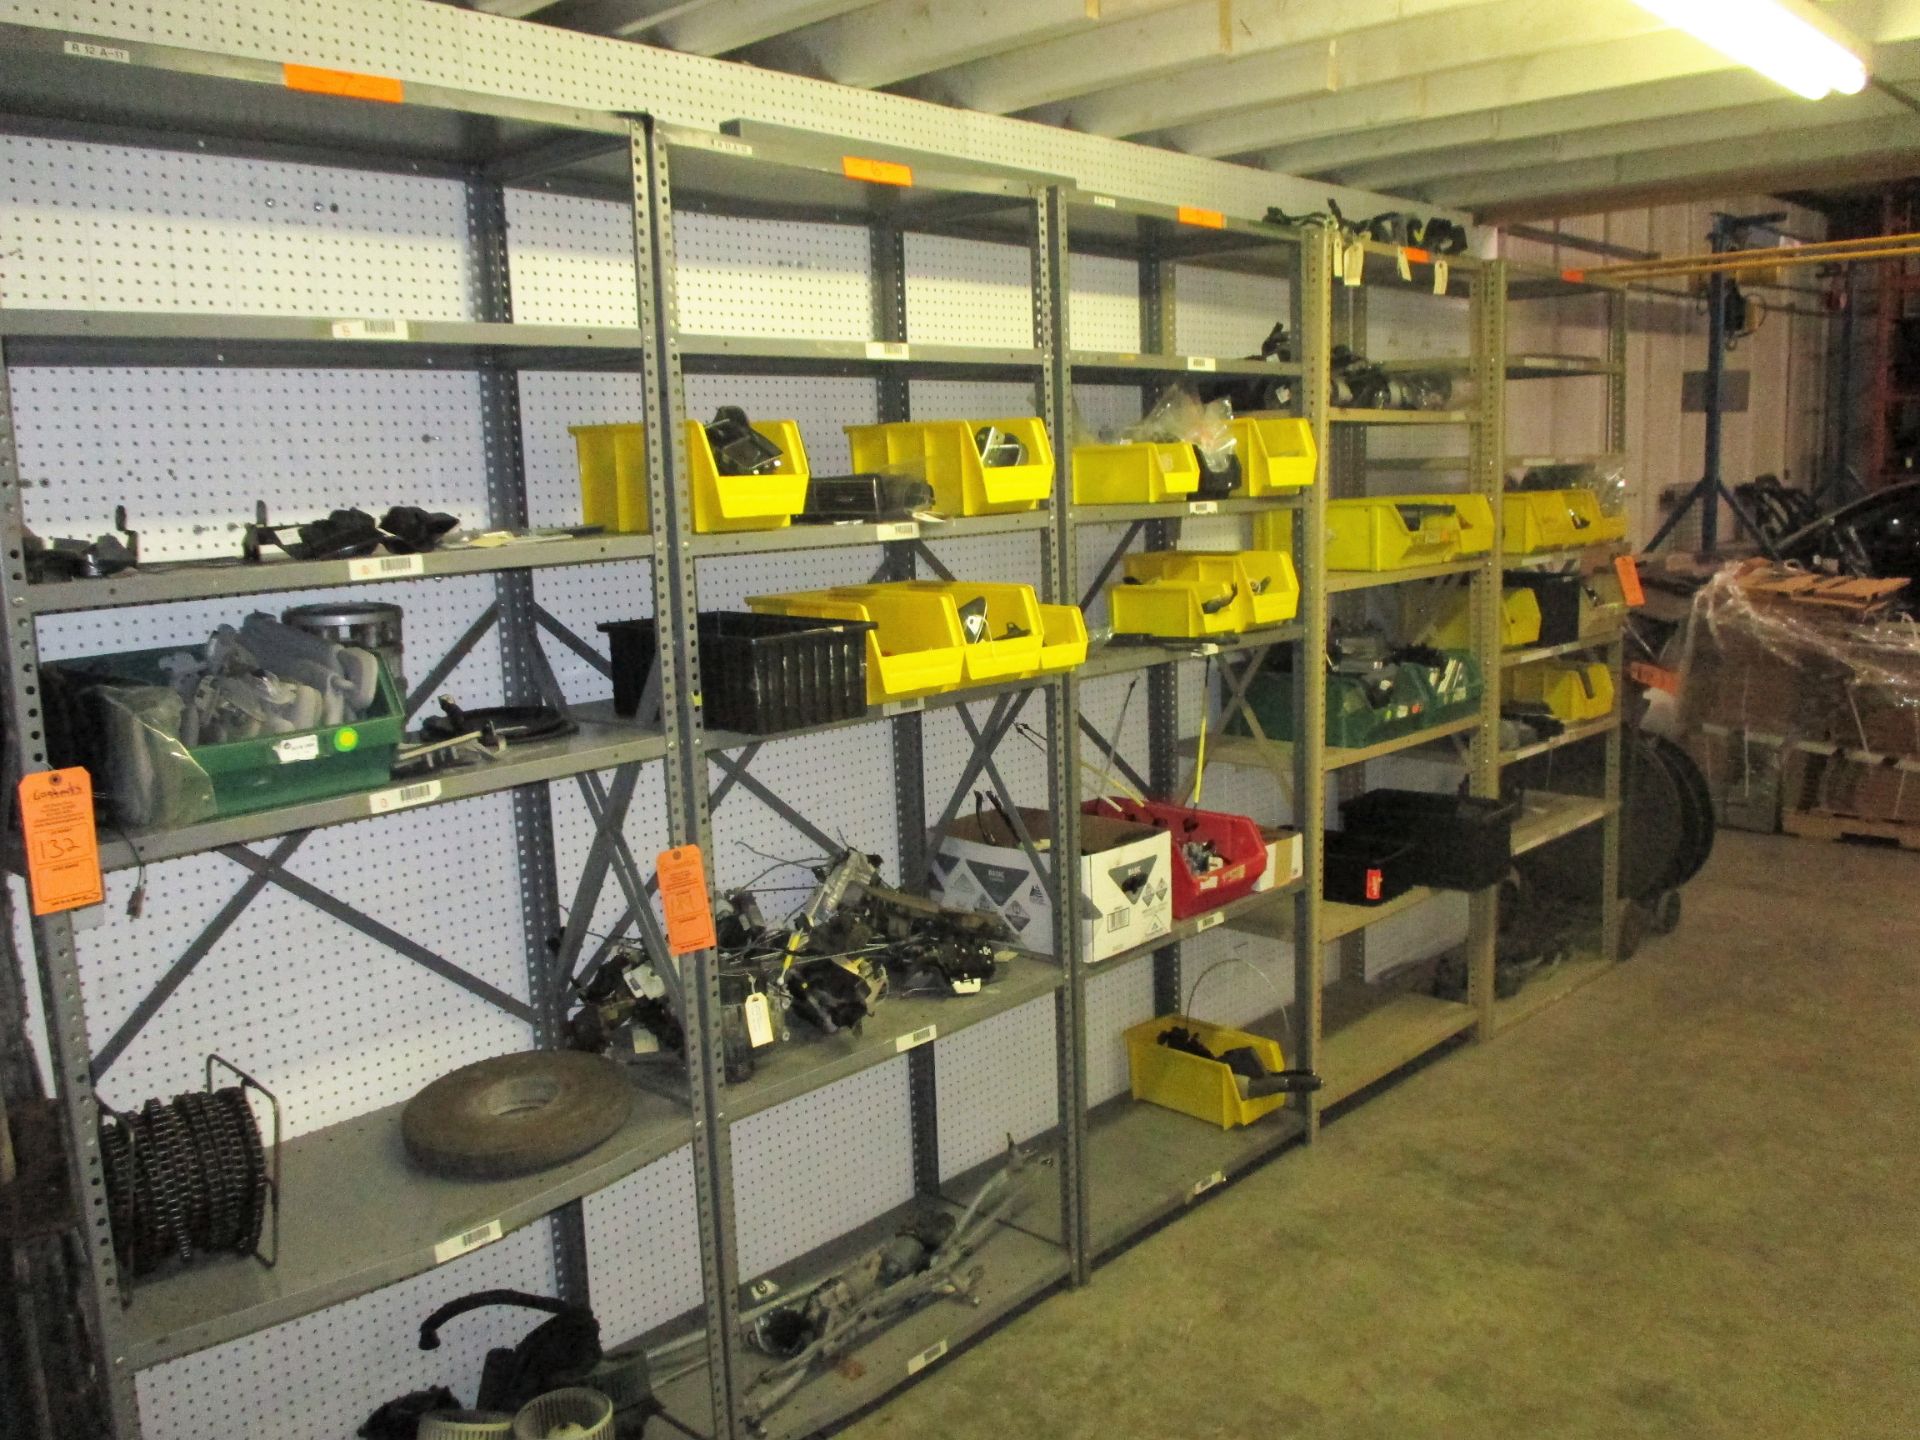 (5) SECTIONS OF PAN SHELVING